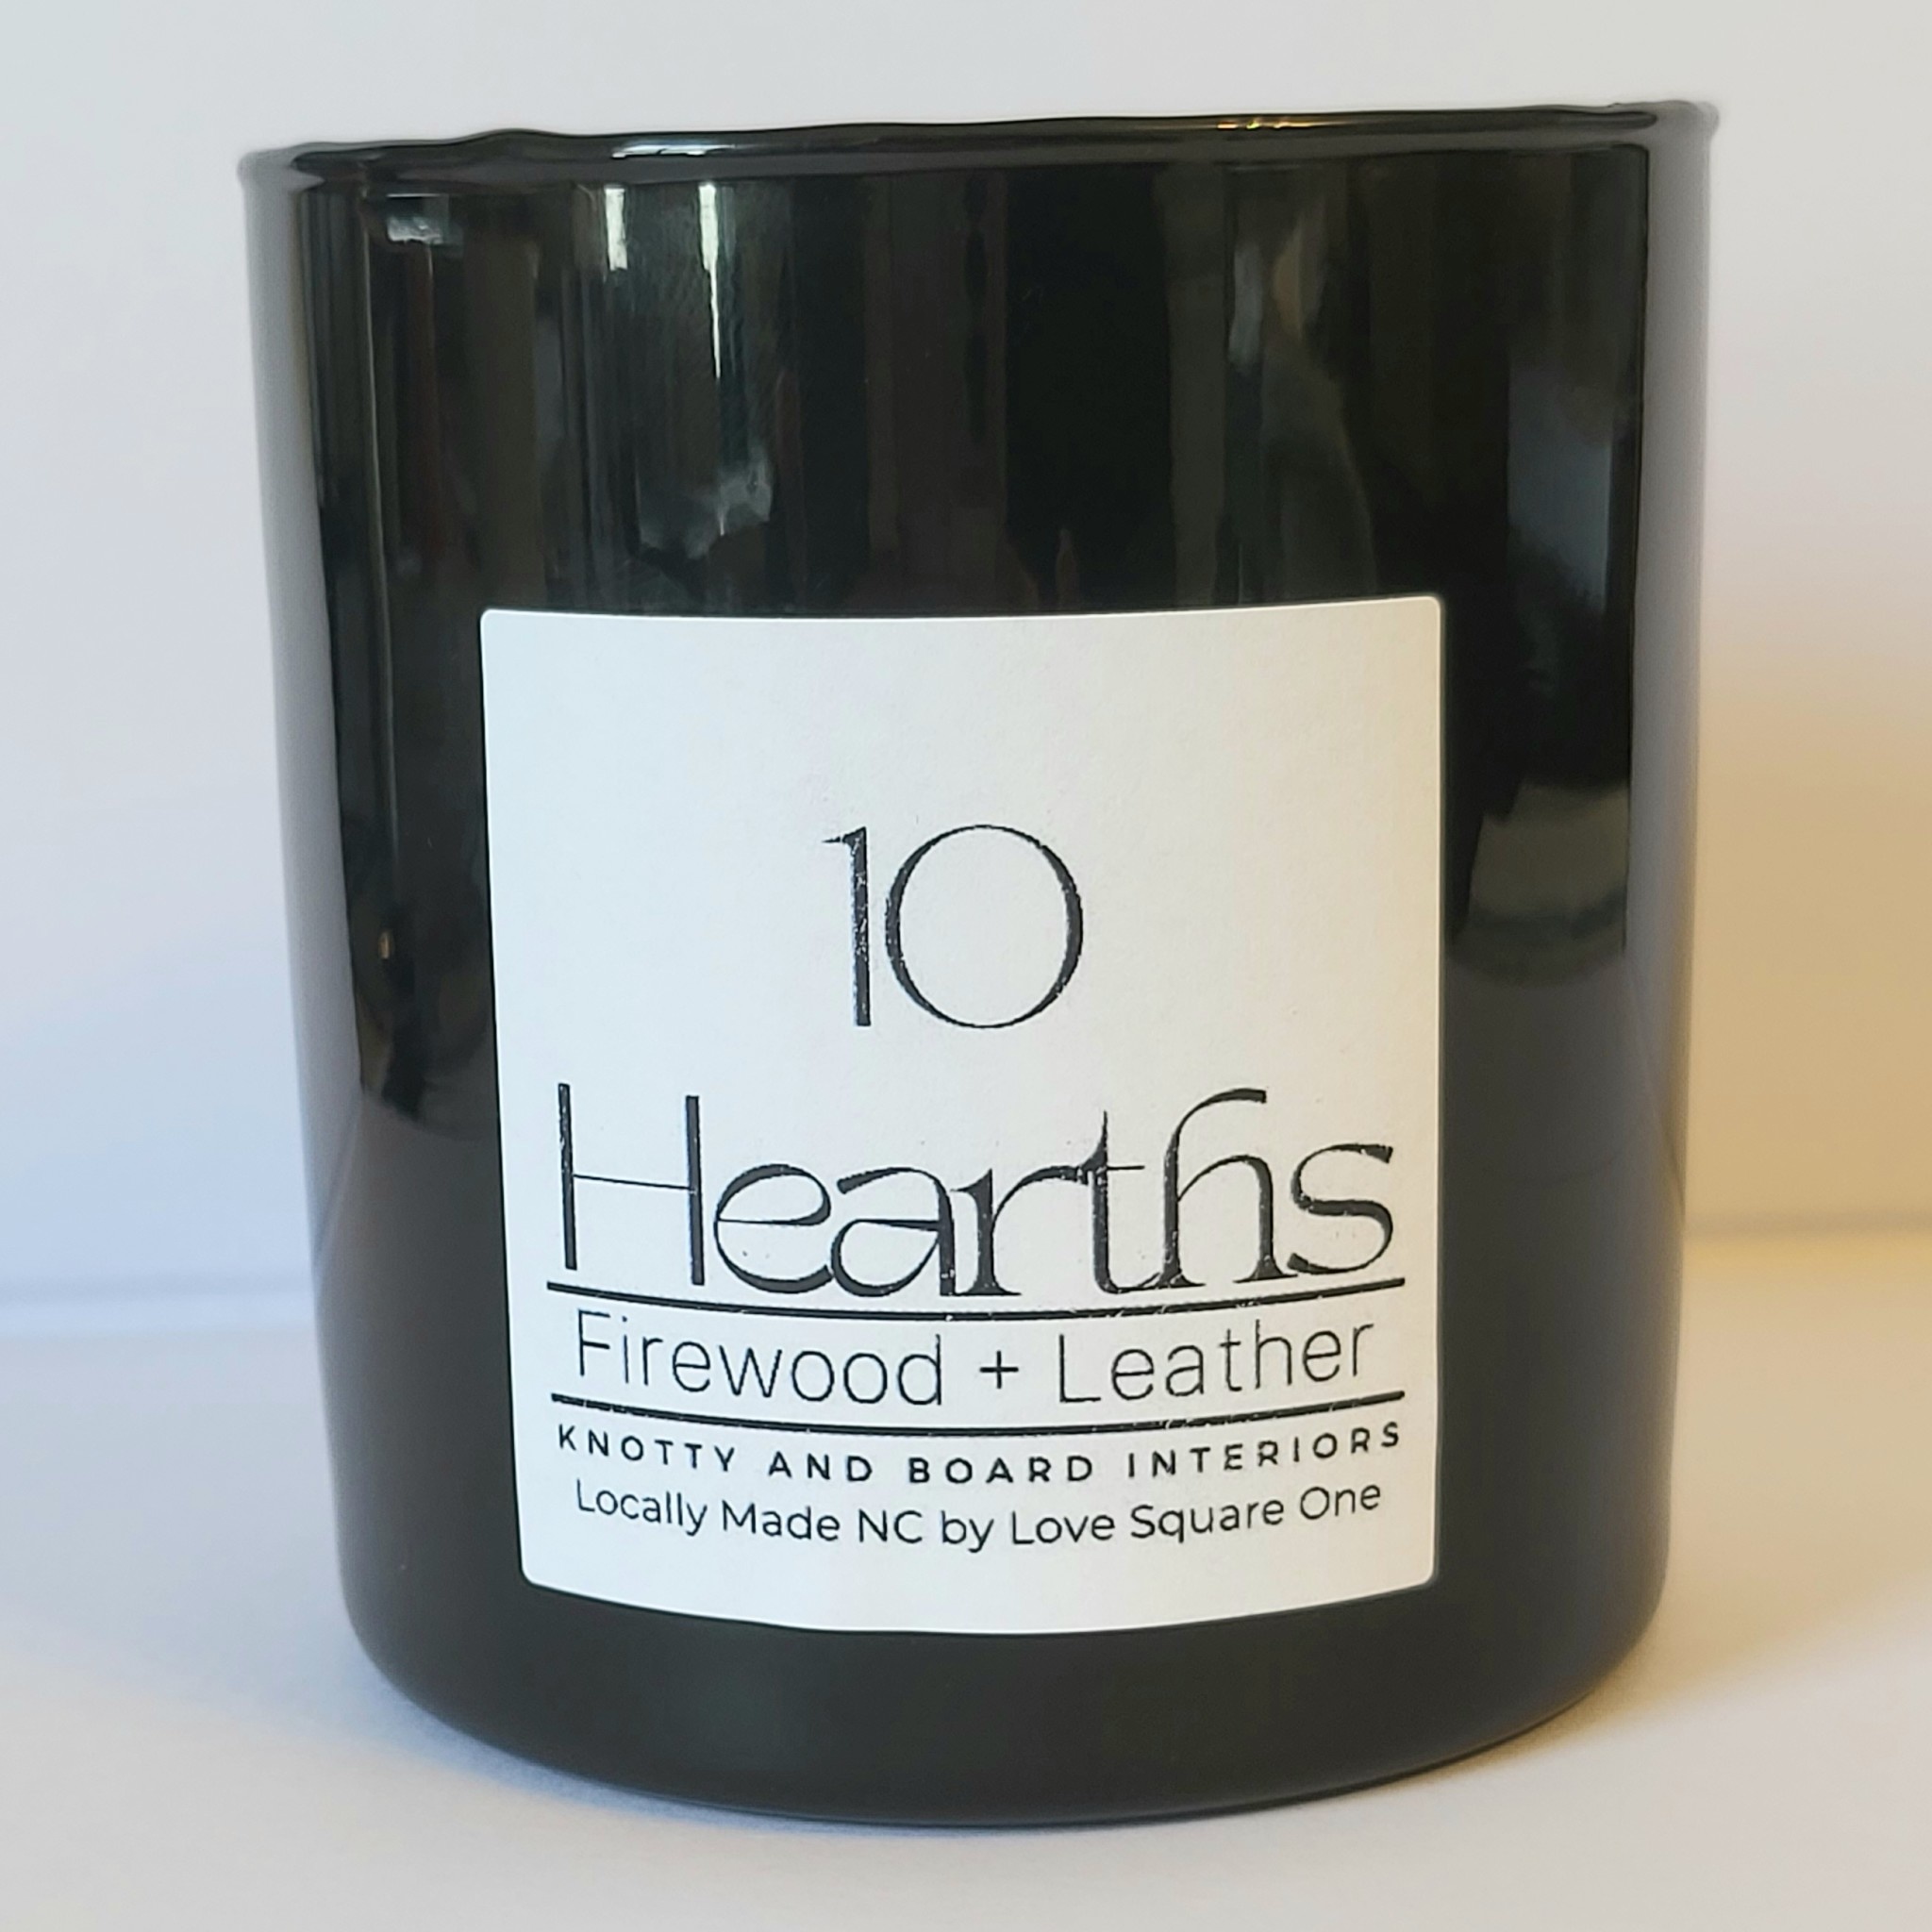 Love Square One Walnut + Main Candle, 10 Hearths, 9 oz